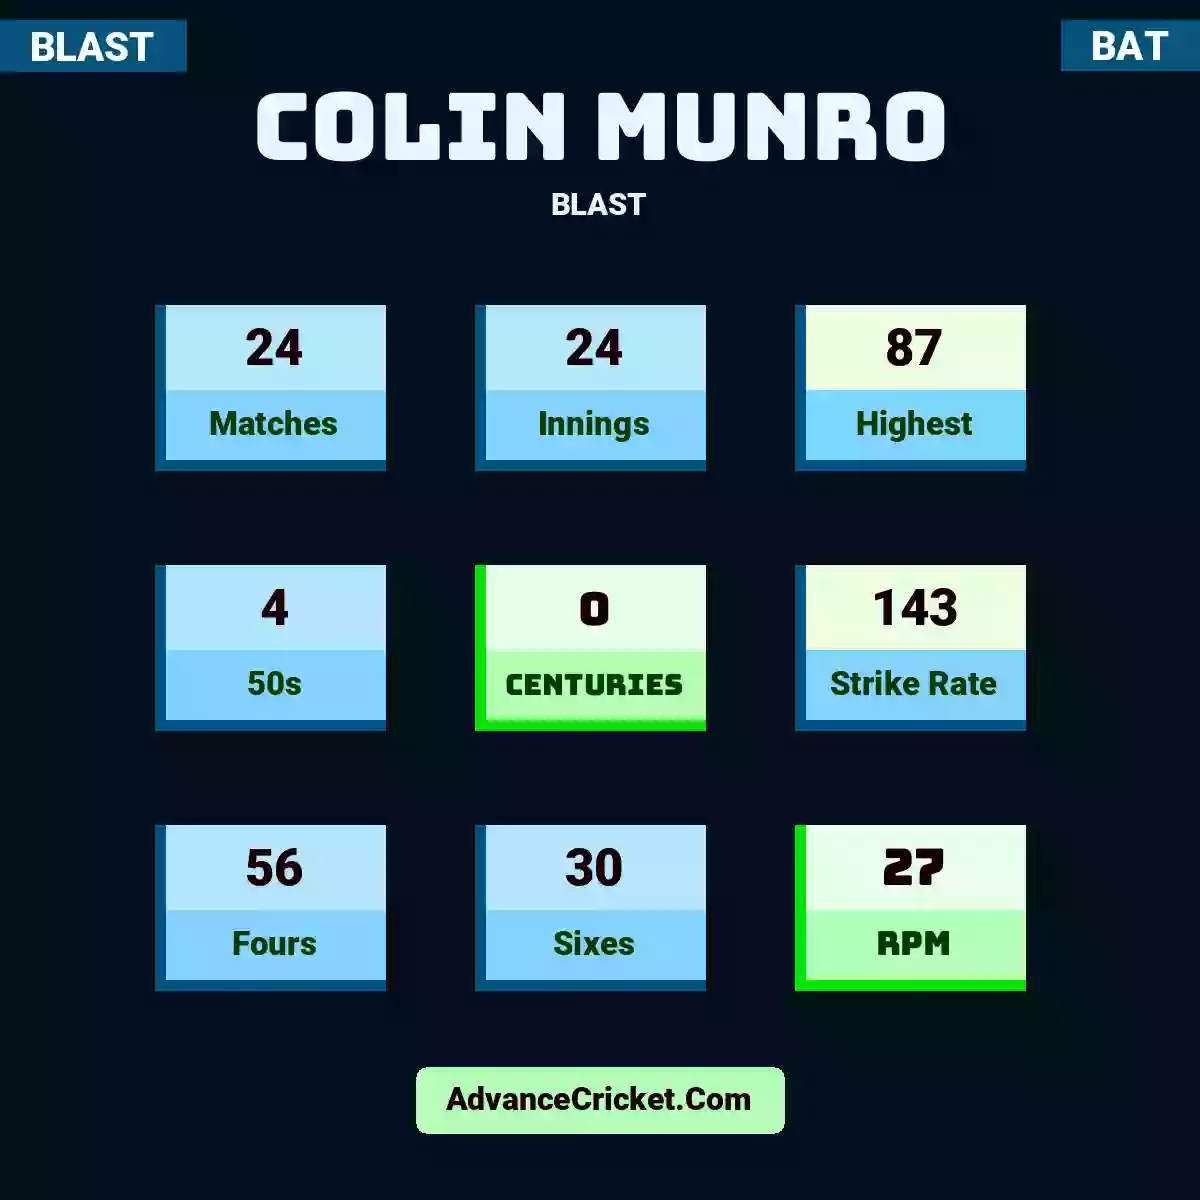 Colin Munro BLAST , Colin Munro played 24 matches, scored 87 runs as highest, 4 half-centuries, and 0 centuries, with a strike rate of 143. C.Munro hit 56 fours and 30 sixes, with an RPM of 27.